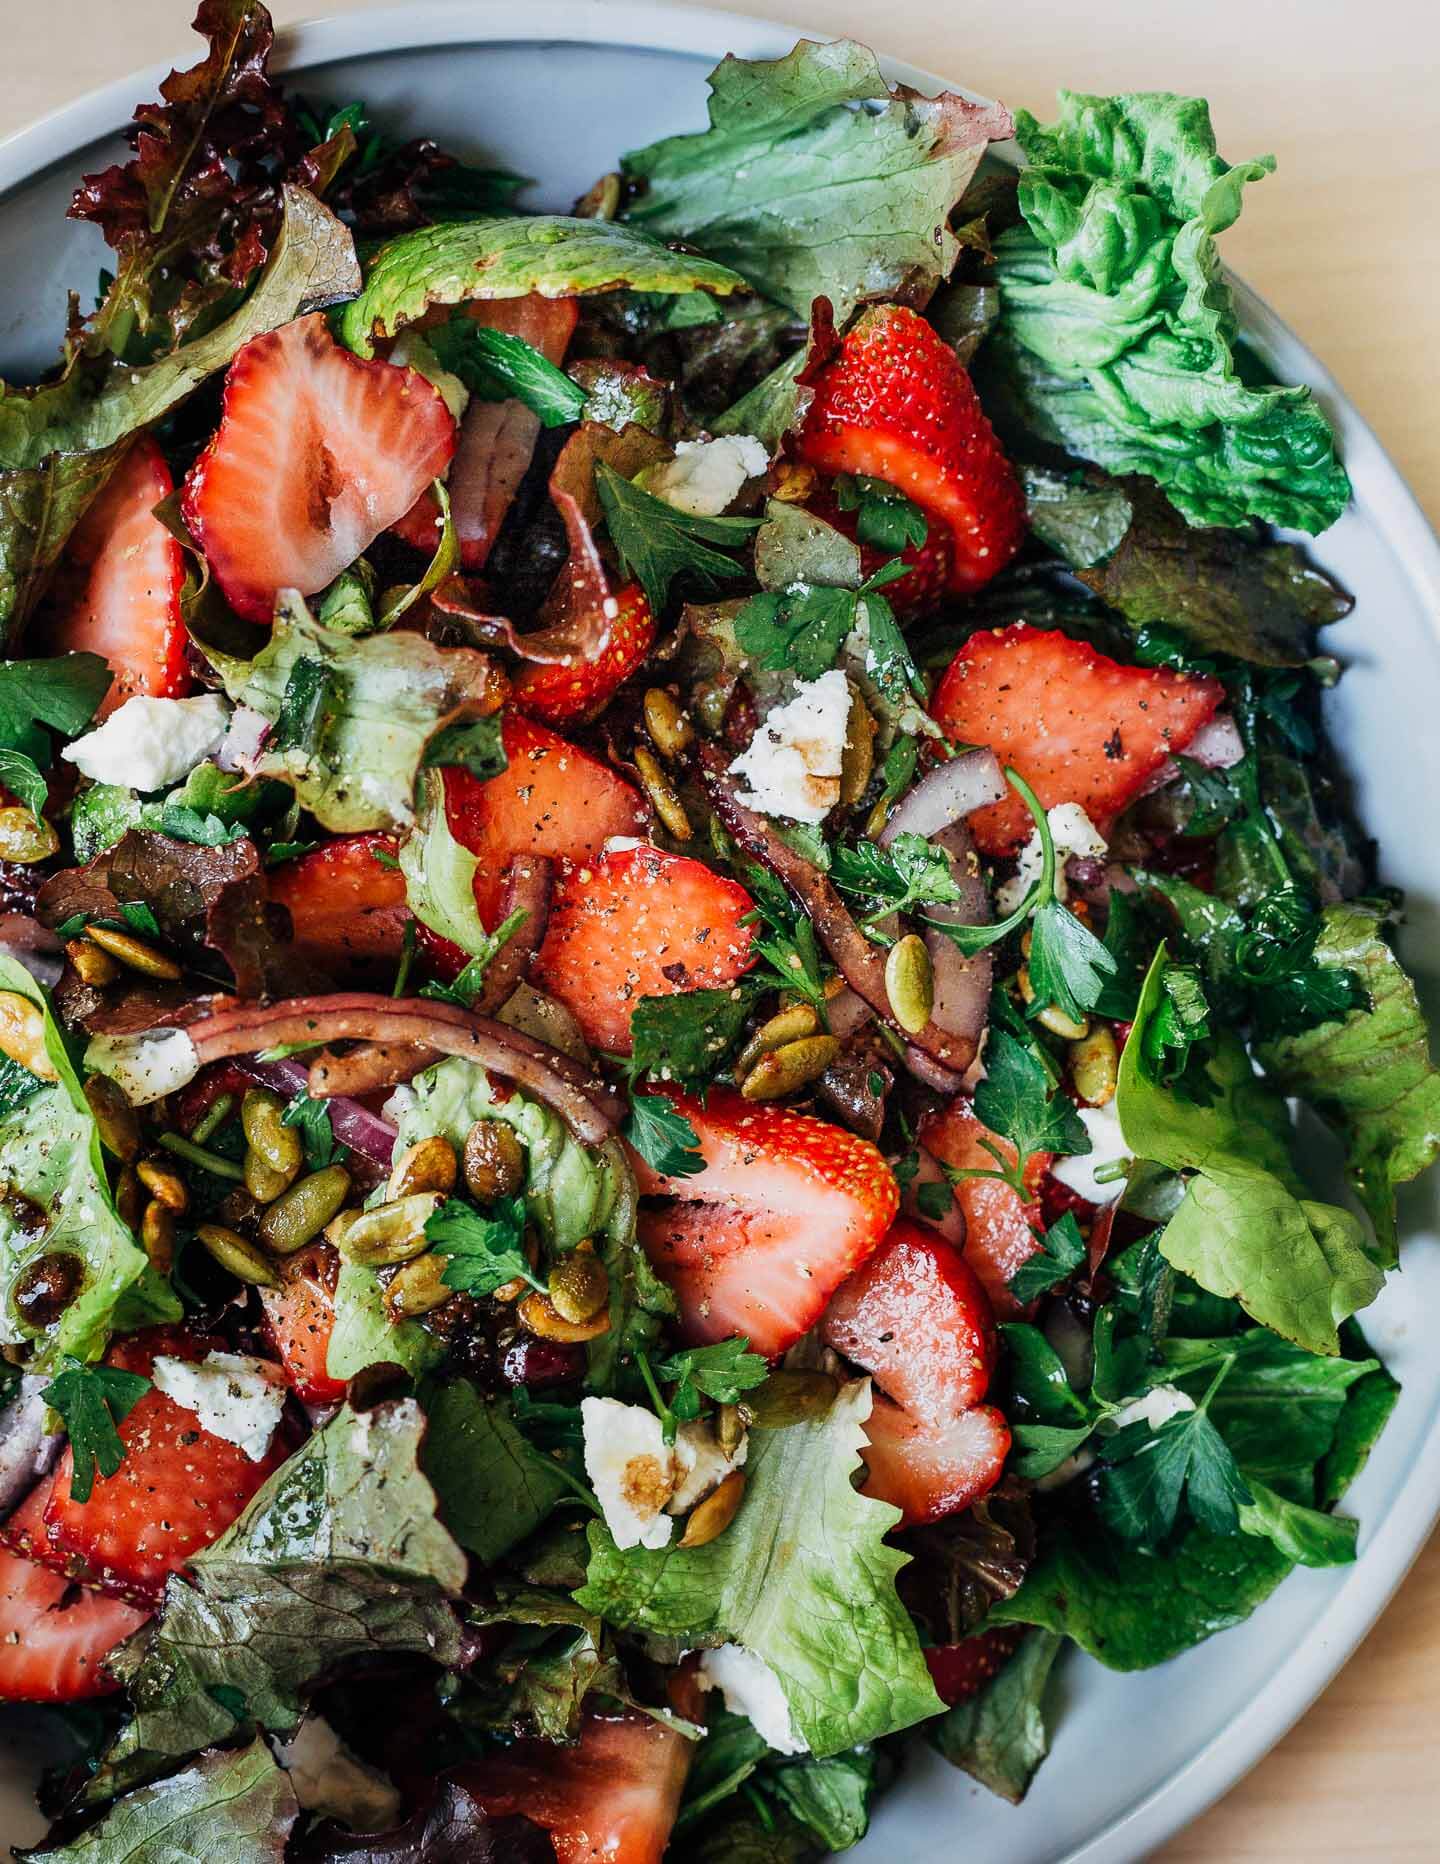 A shallow bowl filled with lettuces, strawberries, and salad other toppings. 